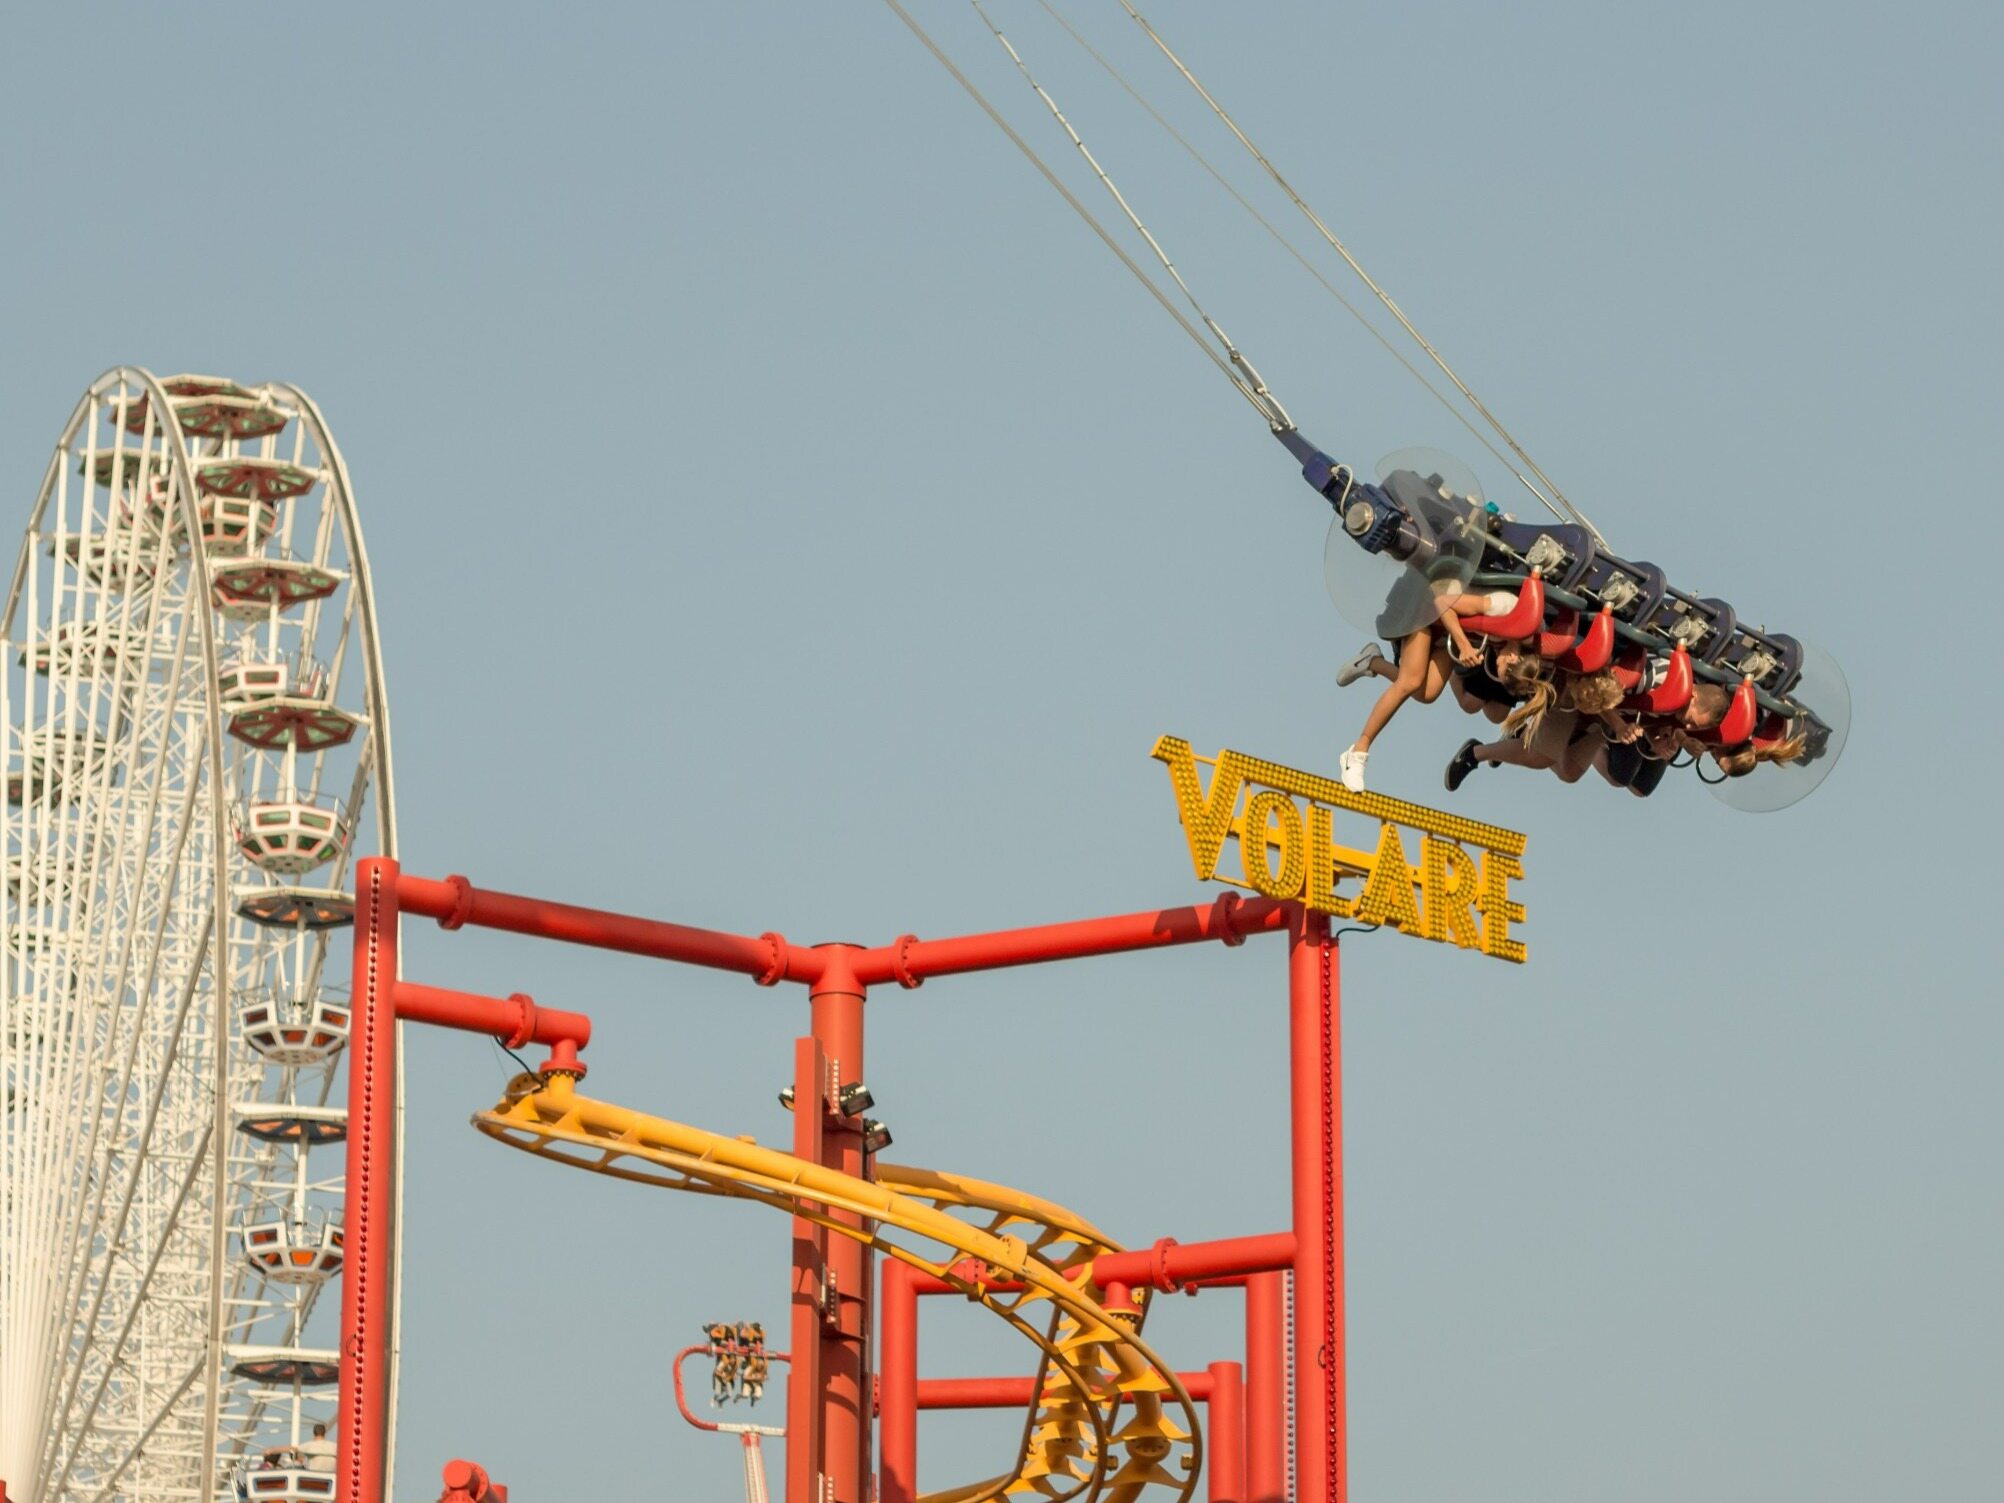 Tragedy in a European amusement park.  The teenager died while driving